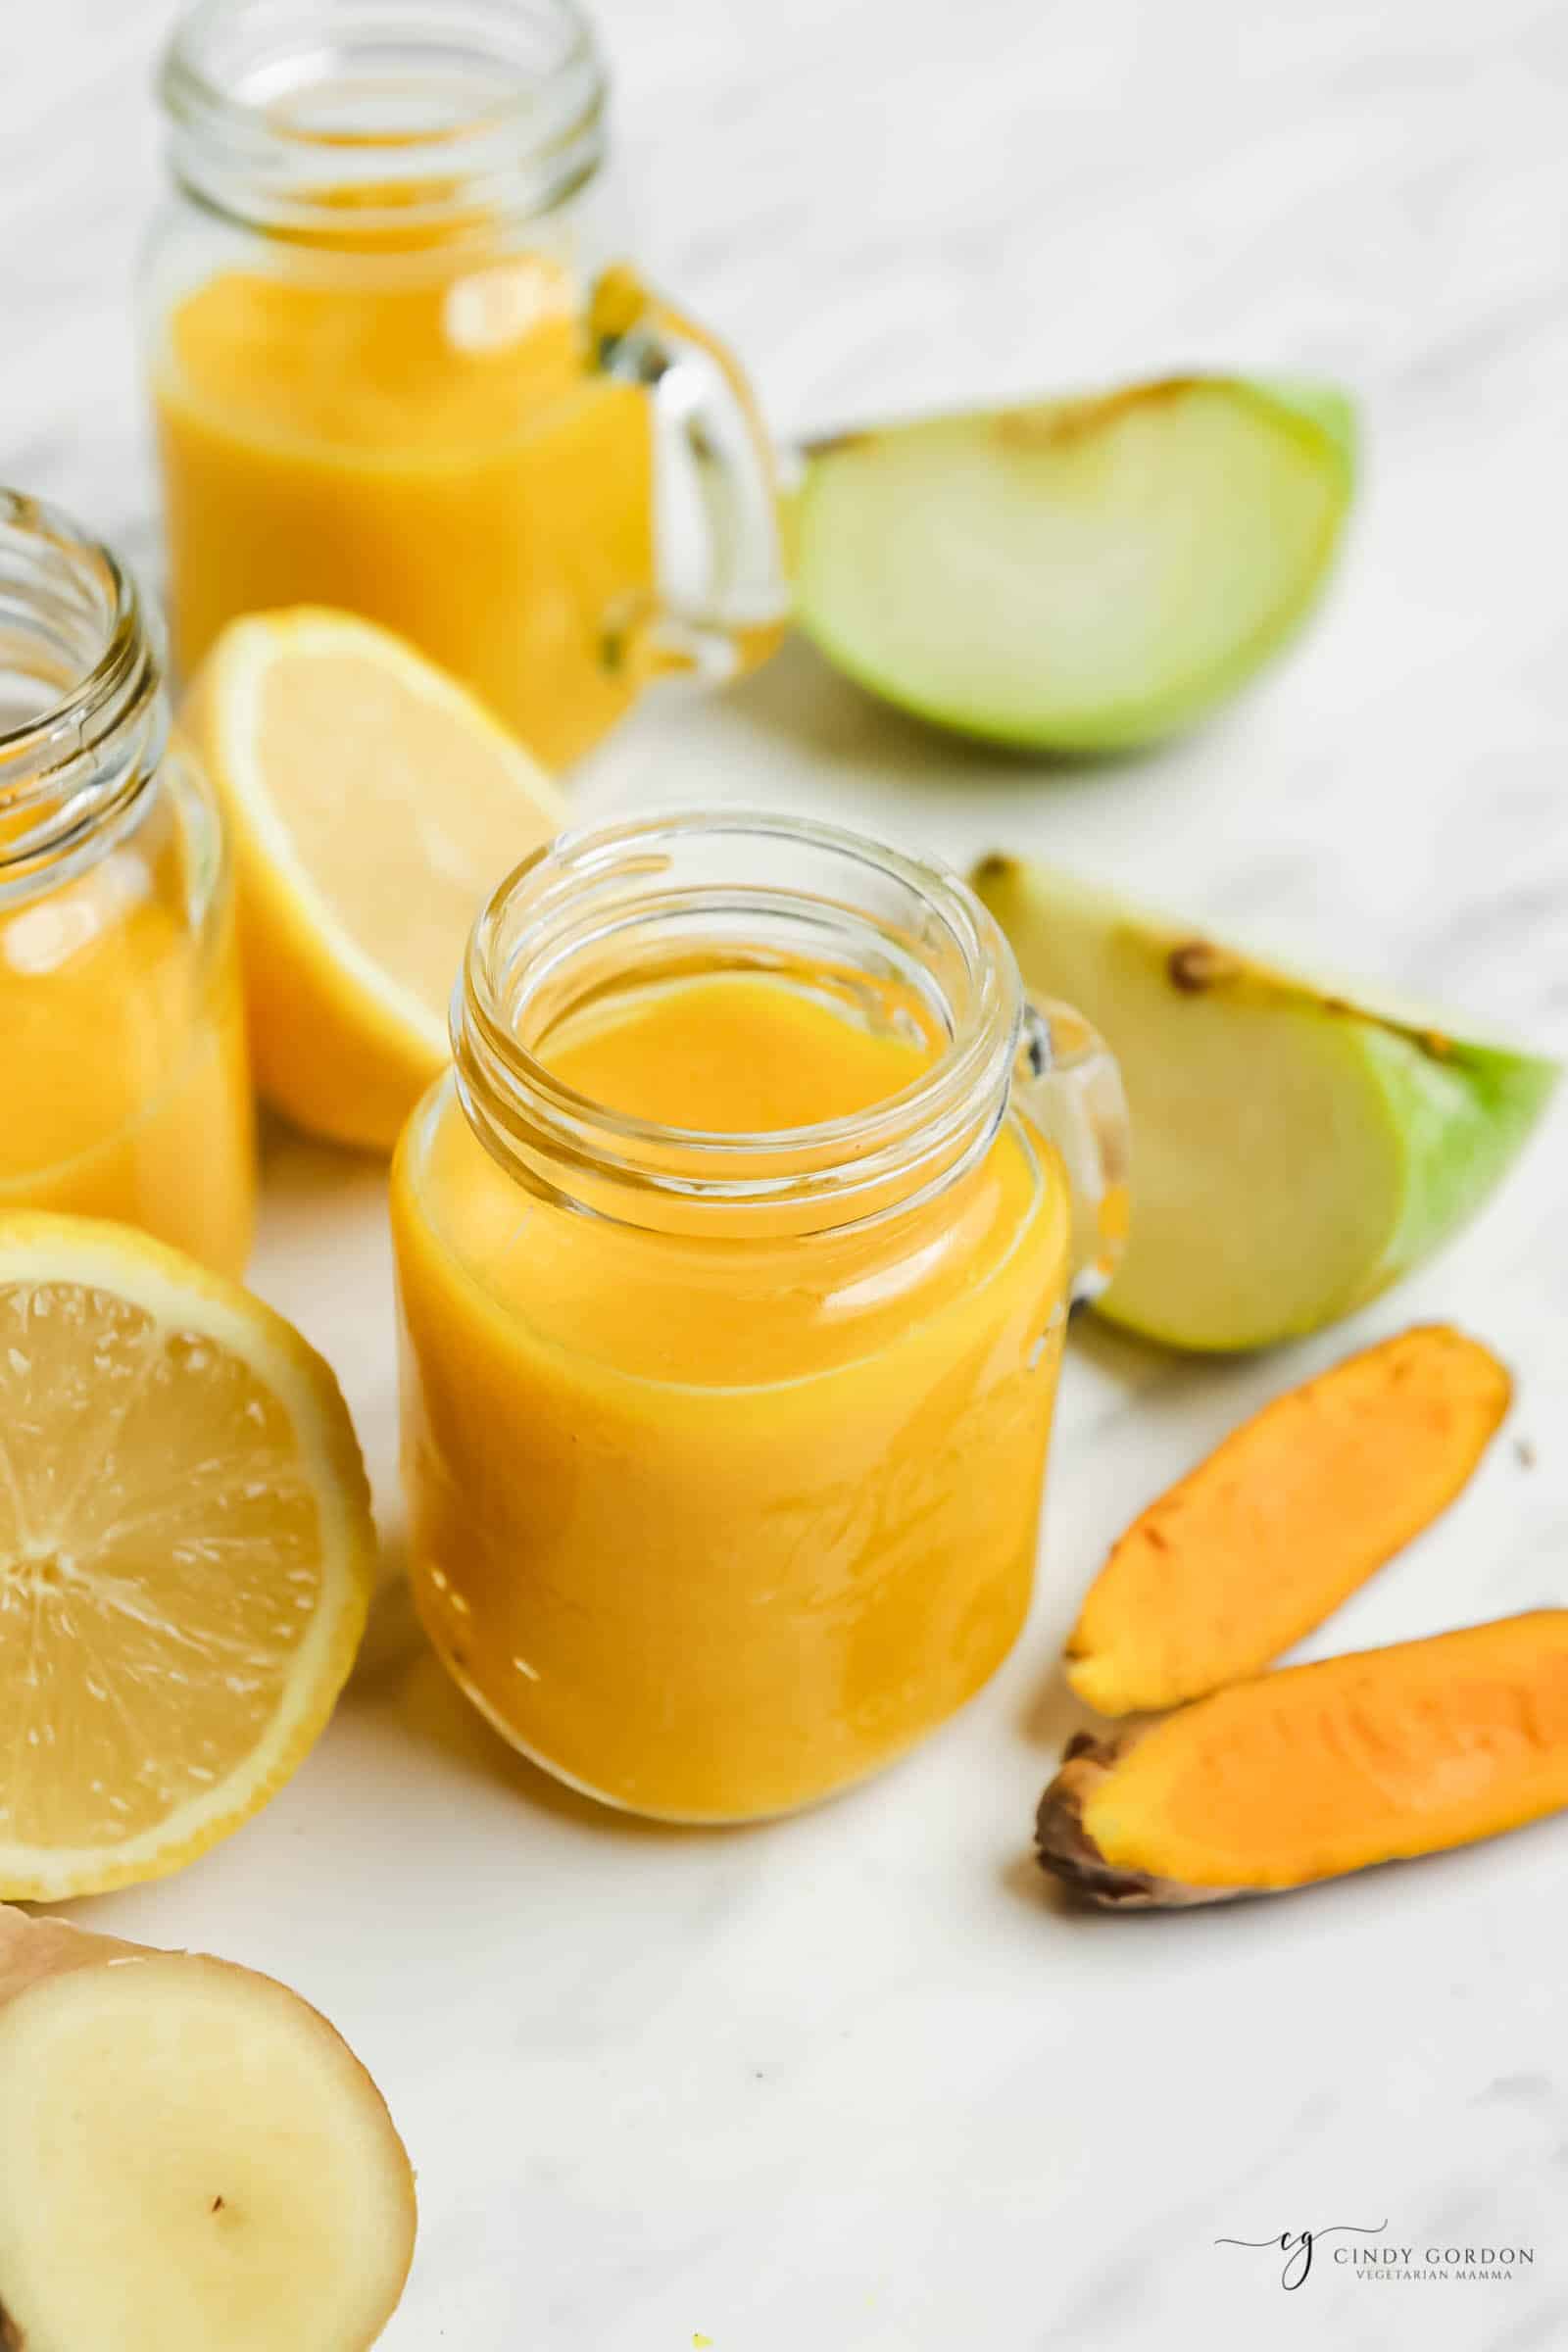 a small mason jar mug filled with orange ginger tumeric juice. Around the jar are pieces of apples, lemon, ginger, and tumeric root